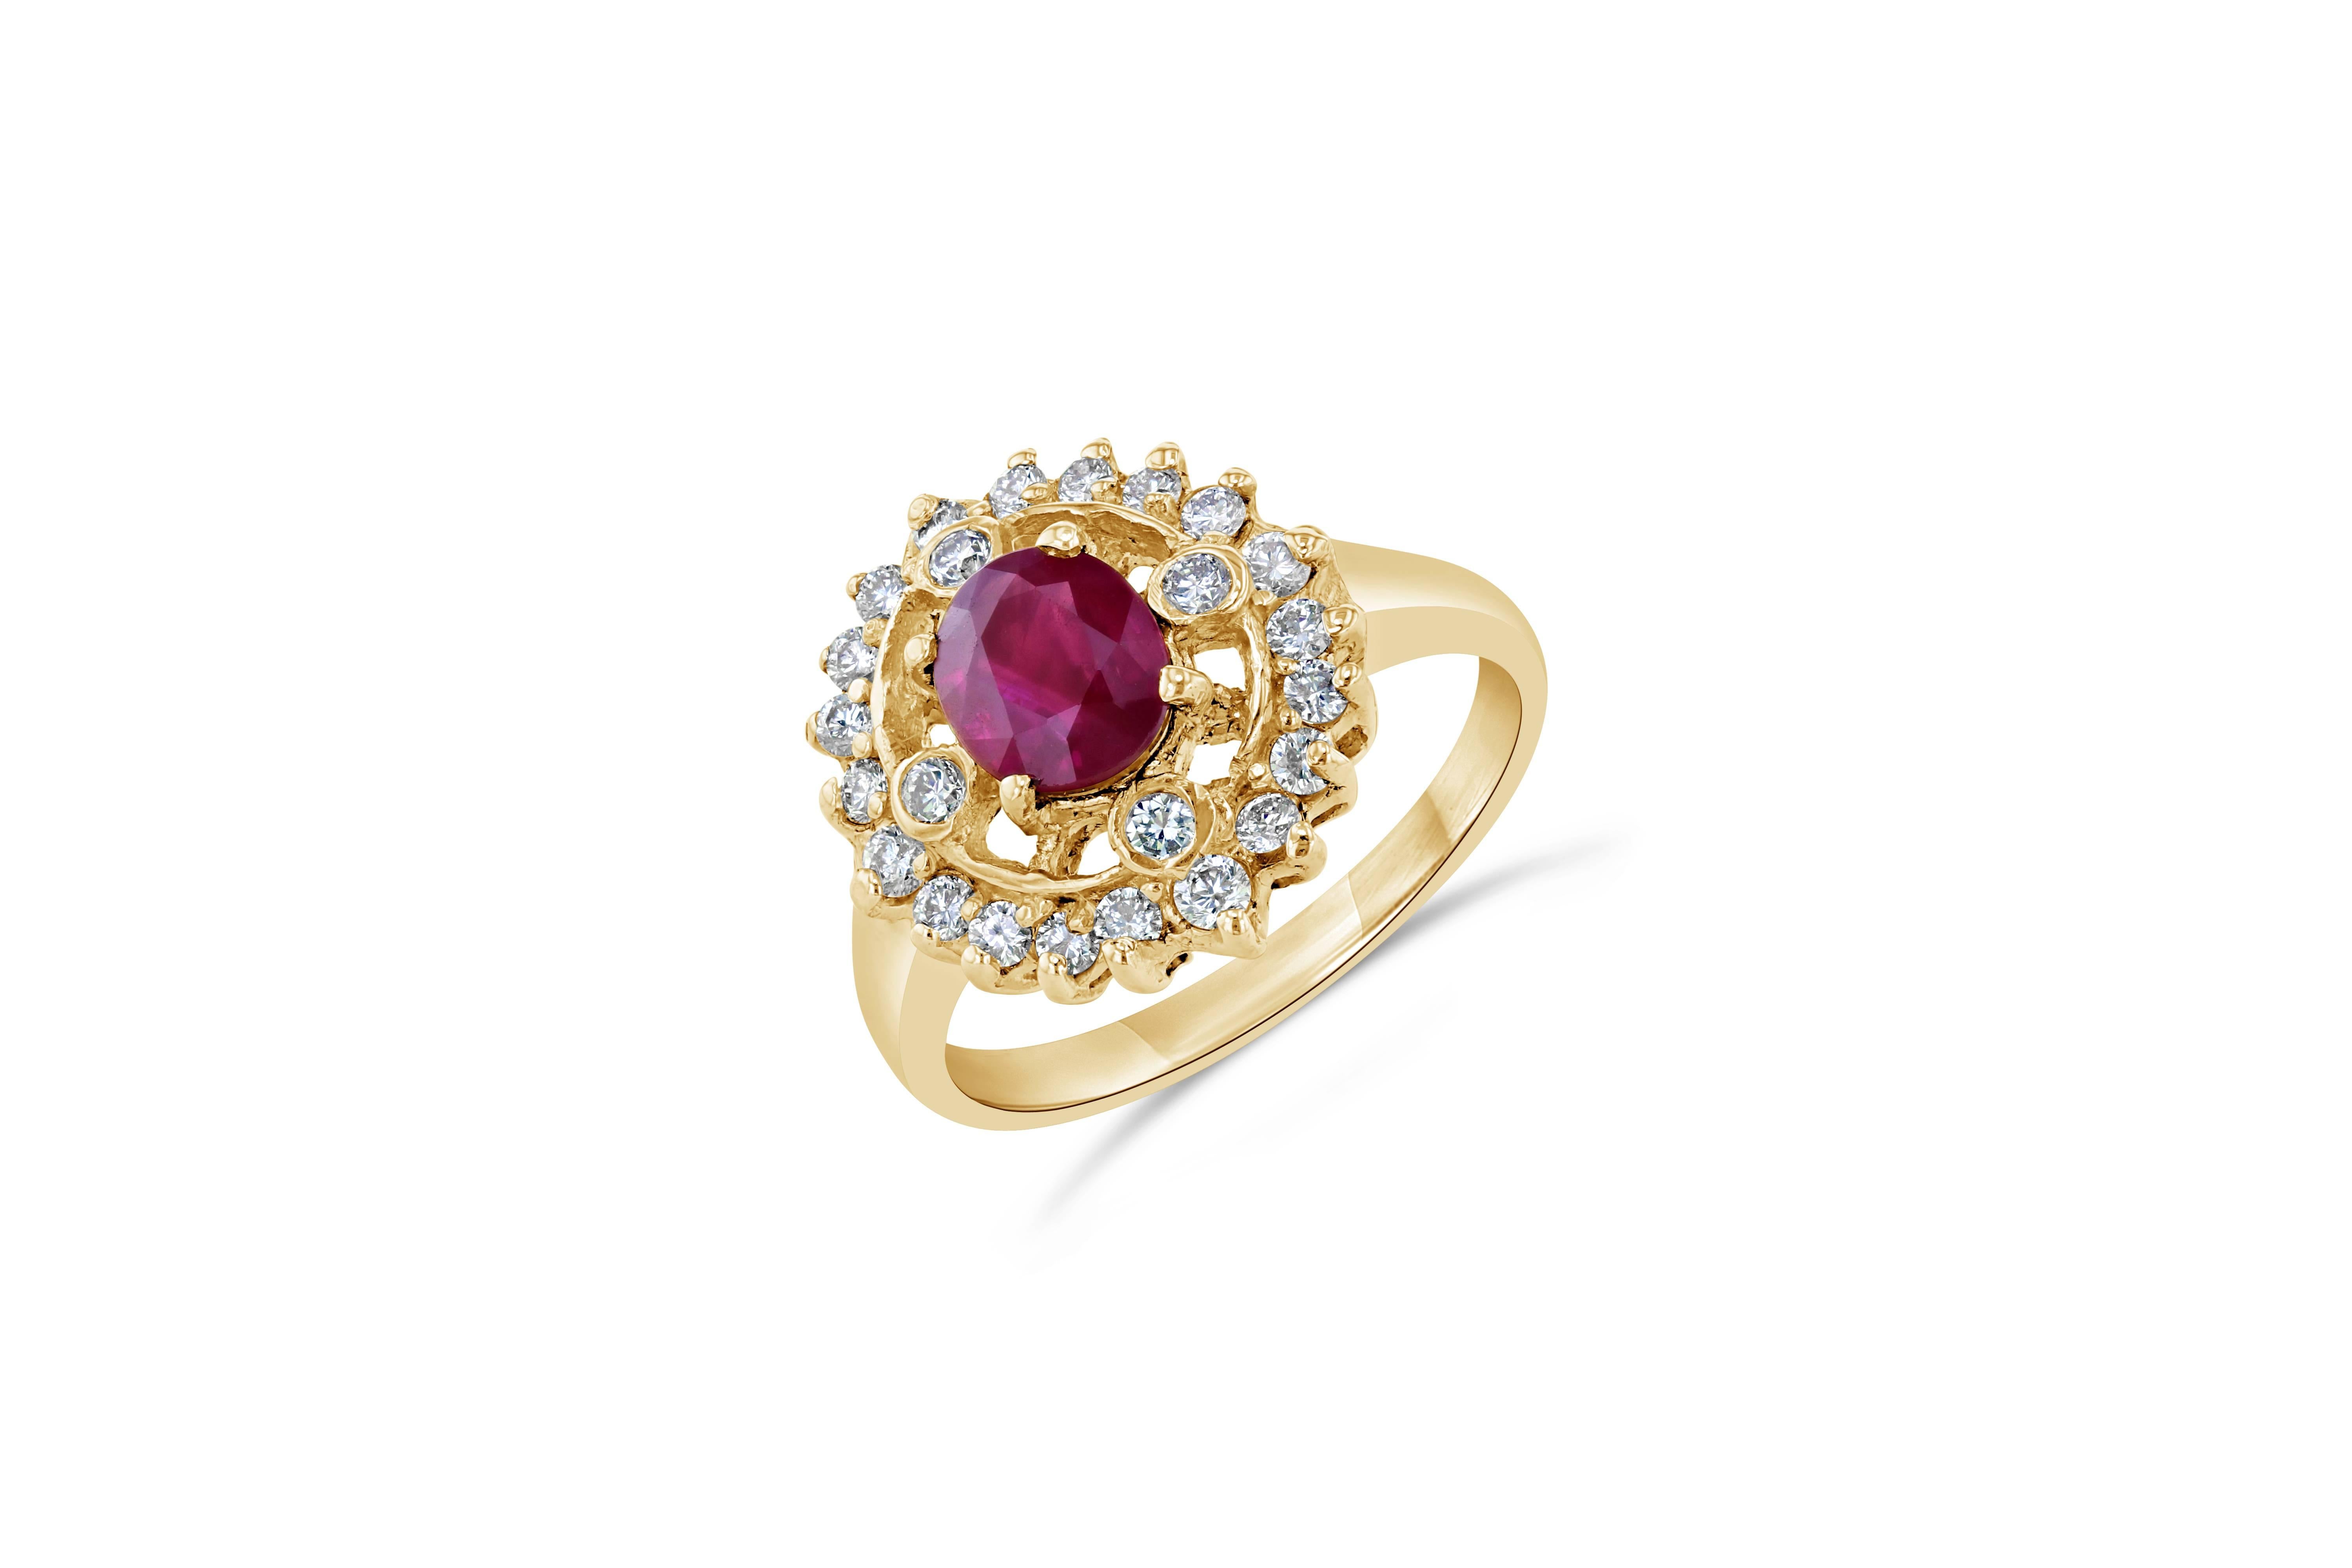 This stunning Ruby and Diamond Ring is art-deco inspired with a unique vintage design that reflects the beauty of jewelry from the past. The Ruby has its descents from Mozambique, Africa and weighs 1.17 Carats. There are 24 Round Cut Diamonds with a